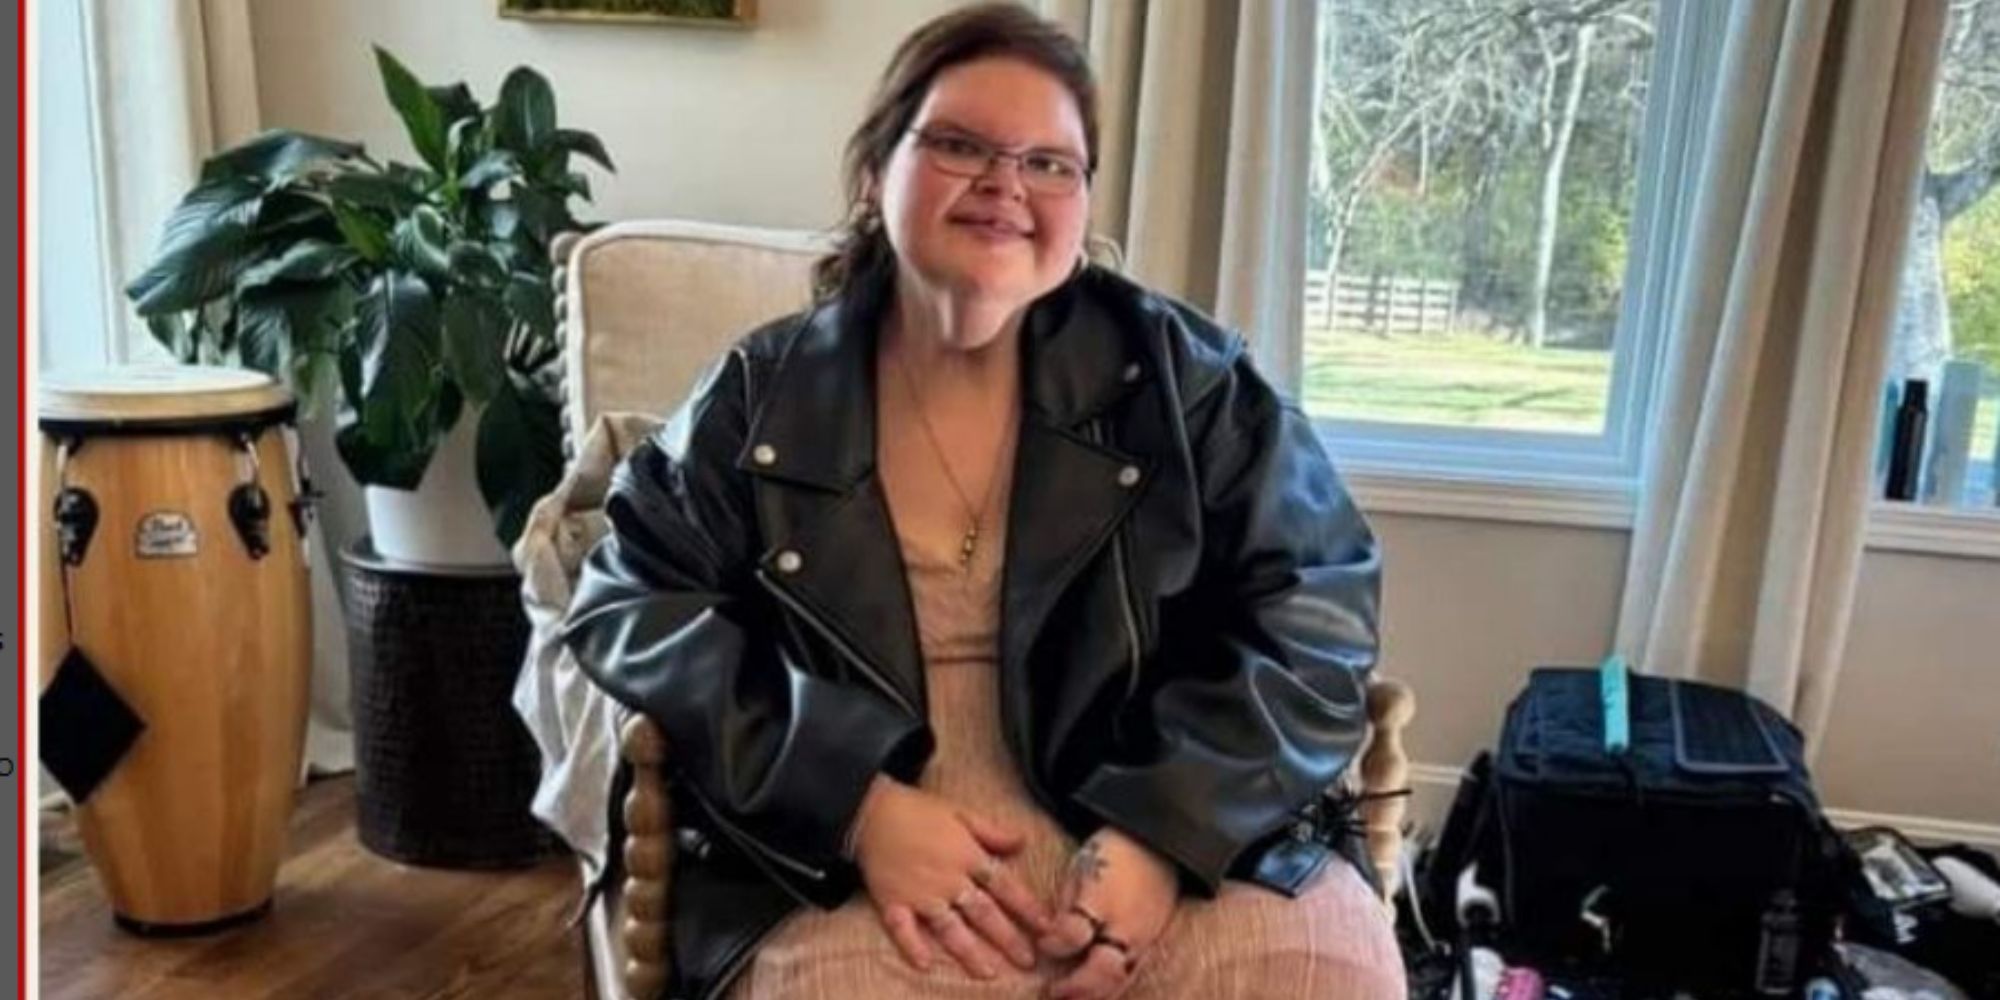 1000-lb sisters tammy slaton in black leather jacket seated in a living room with a window in background